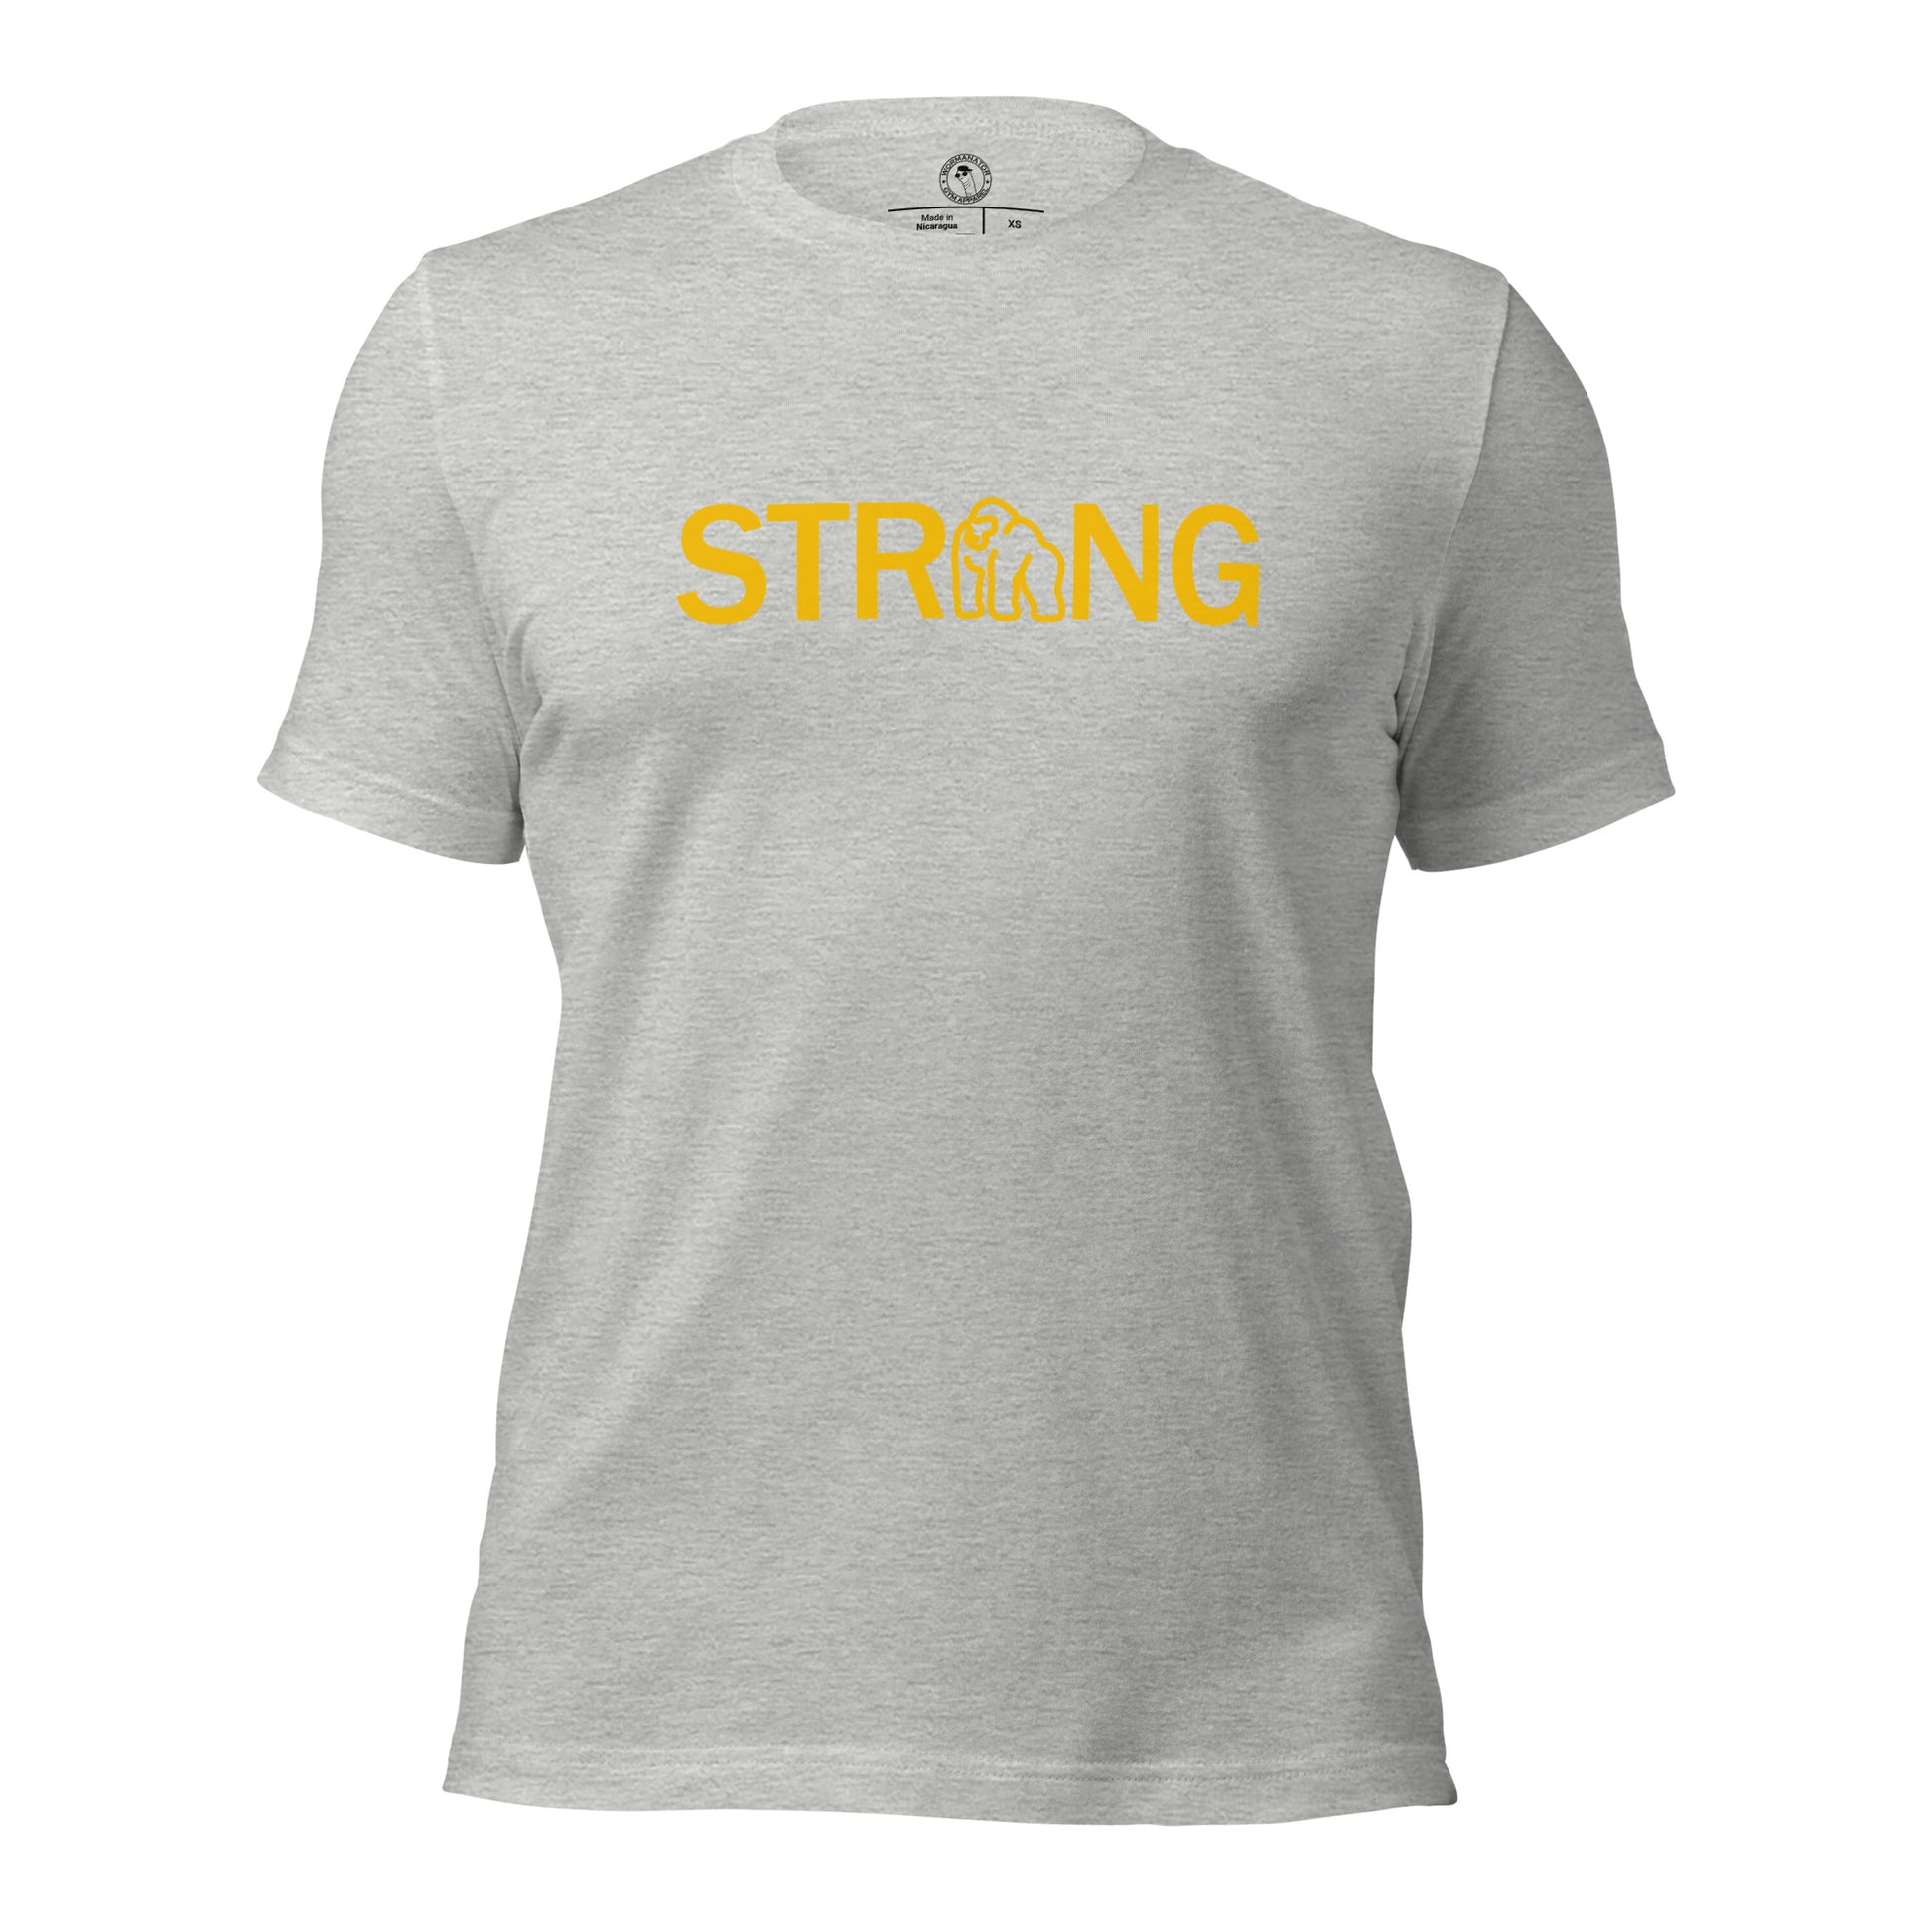 Ape Strong Shirt in Athletic Heather